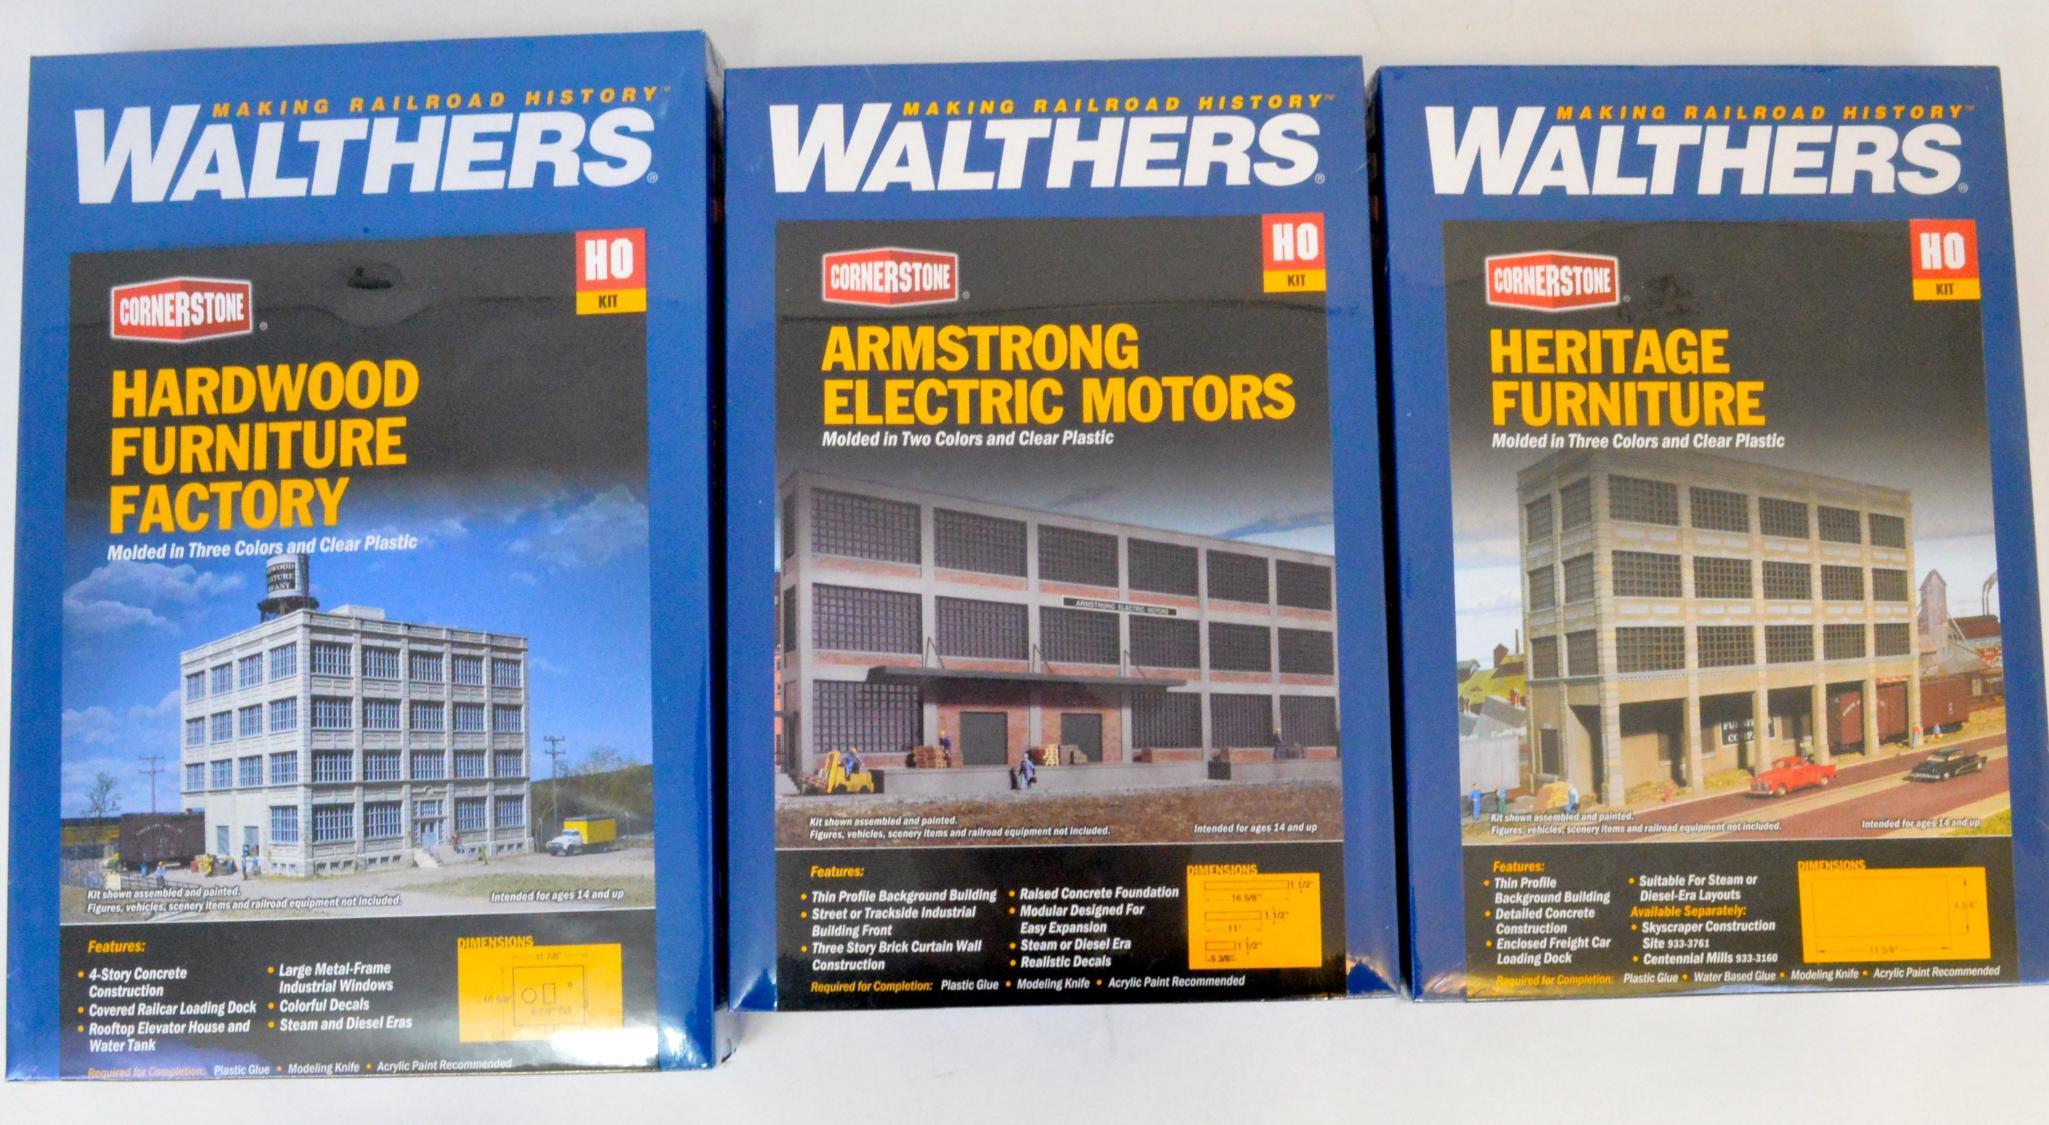 Walthers # 3733 Roof Details Kit HO Scale MIB for sale online